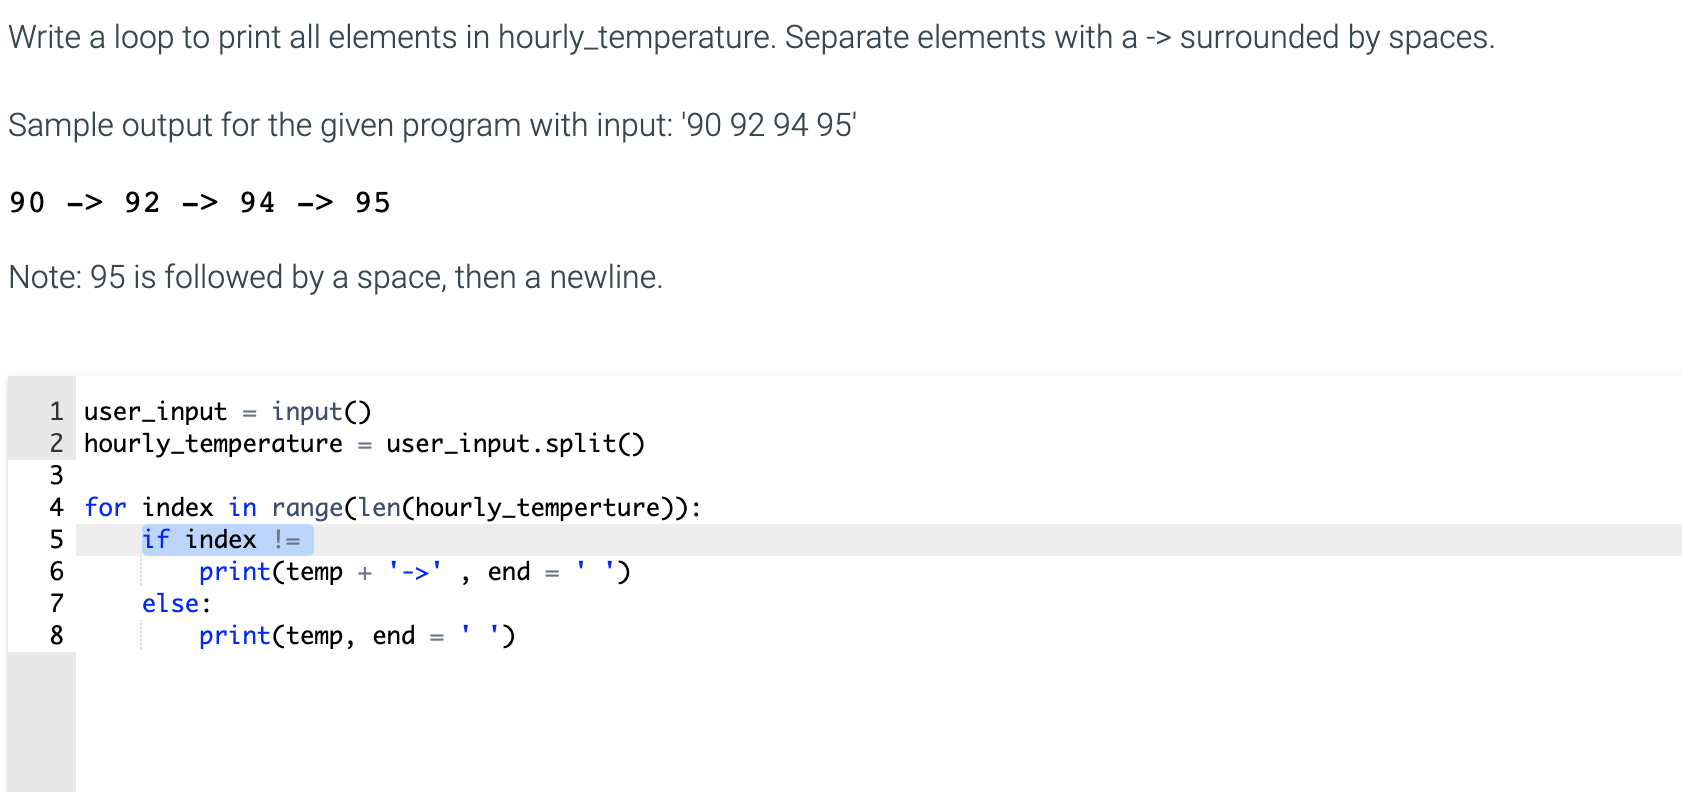 Write a loop to print all elements in hourly_temperature. Separate elements with a -> surrounded by spaces.
Sample output for the given program with input: '90 92 94 95'
90 -> 92 -> 94 -> 95
Note: 95 is followed by a space, then a newline.
1 user_input = input()
2 hourly_temperature
3
user_input.split()
4 for index in range(len(hourly_temperture)):
if index !=
print(temp + '->'
else:
end
')
print(temp, end
')
